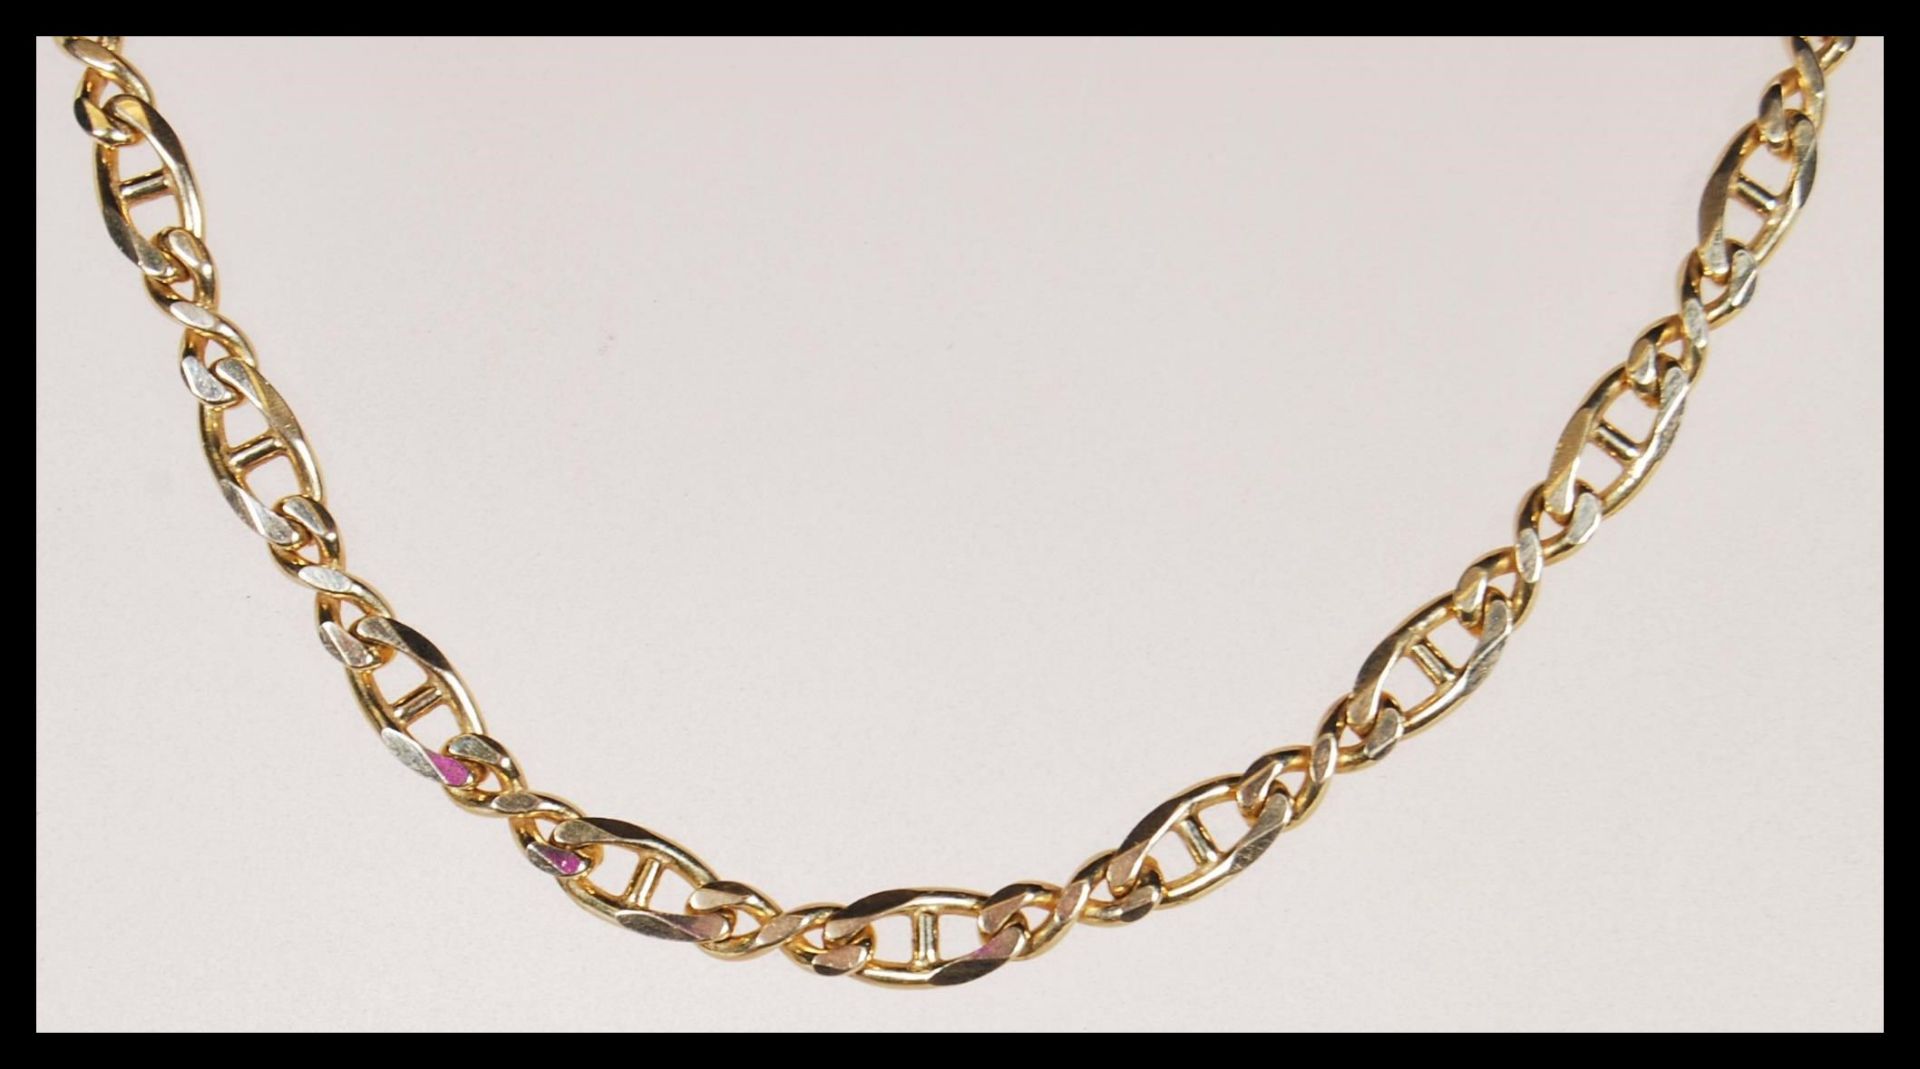 A hallmarked 9ct gold Italian curb link necklace chain having a lobster claw clasp. Weighs 18.6